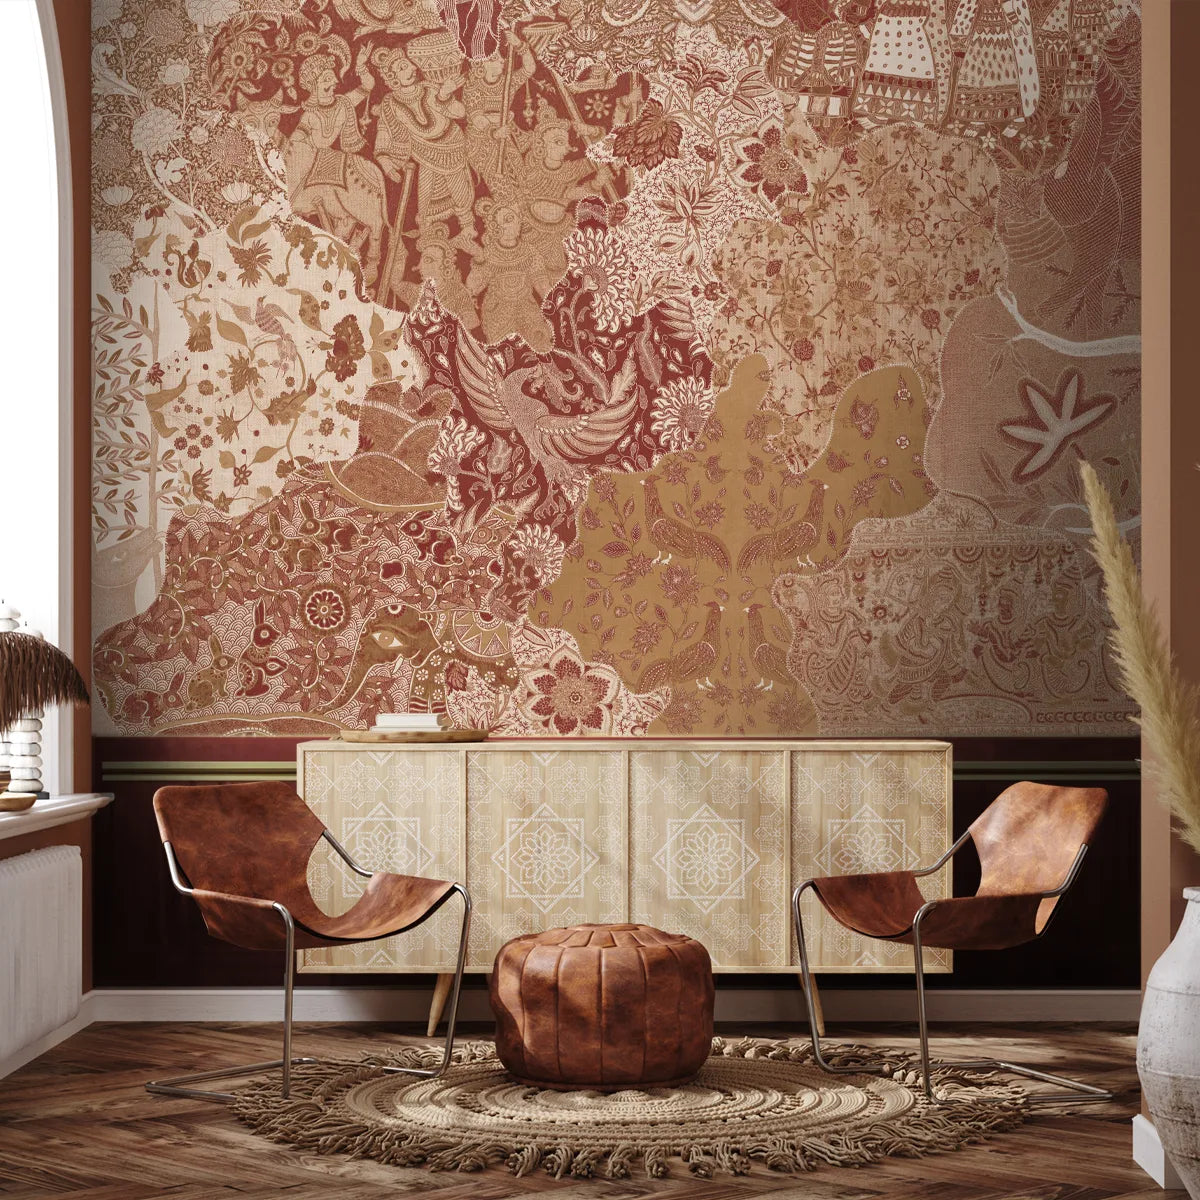 Rang Rali, Indian Wallpaper Inspired by Fabrics of India buy now